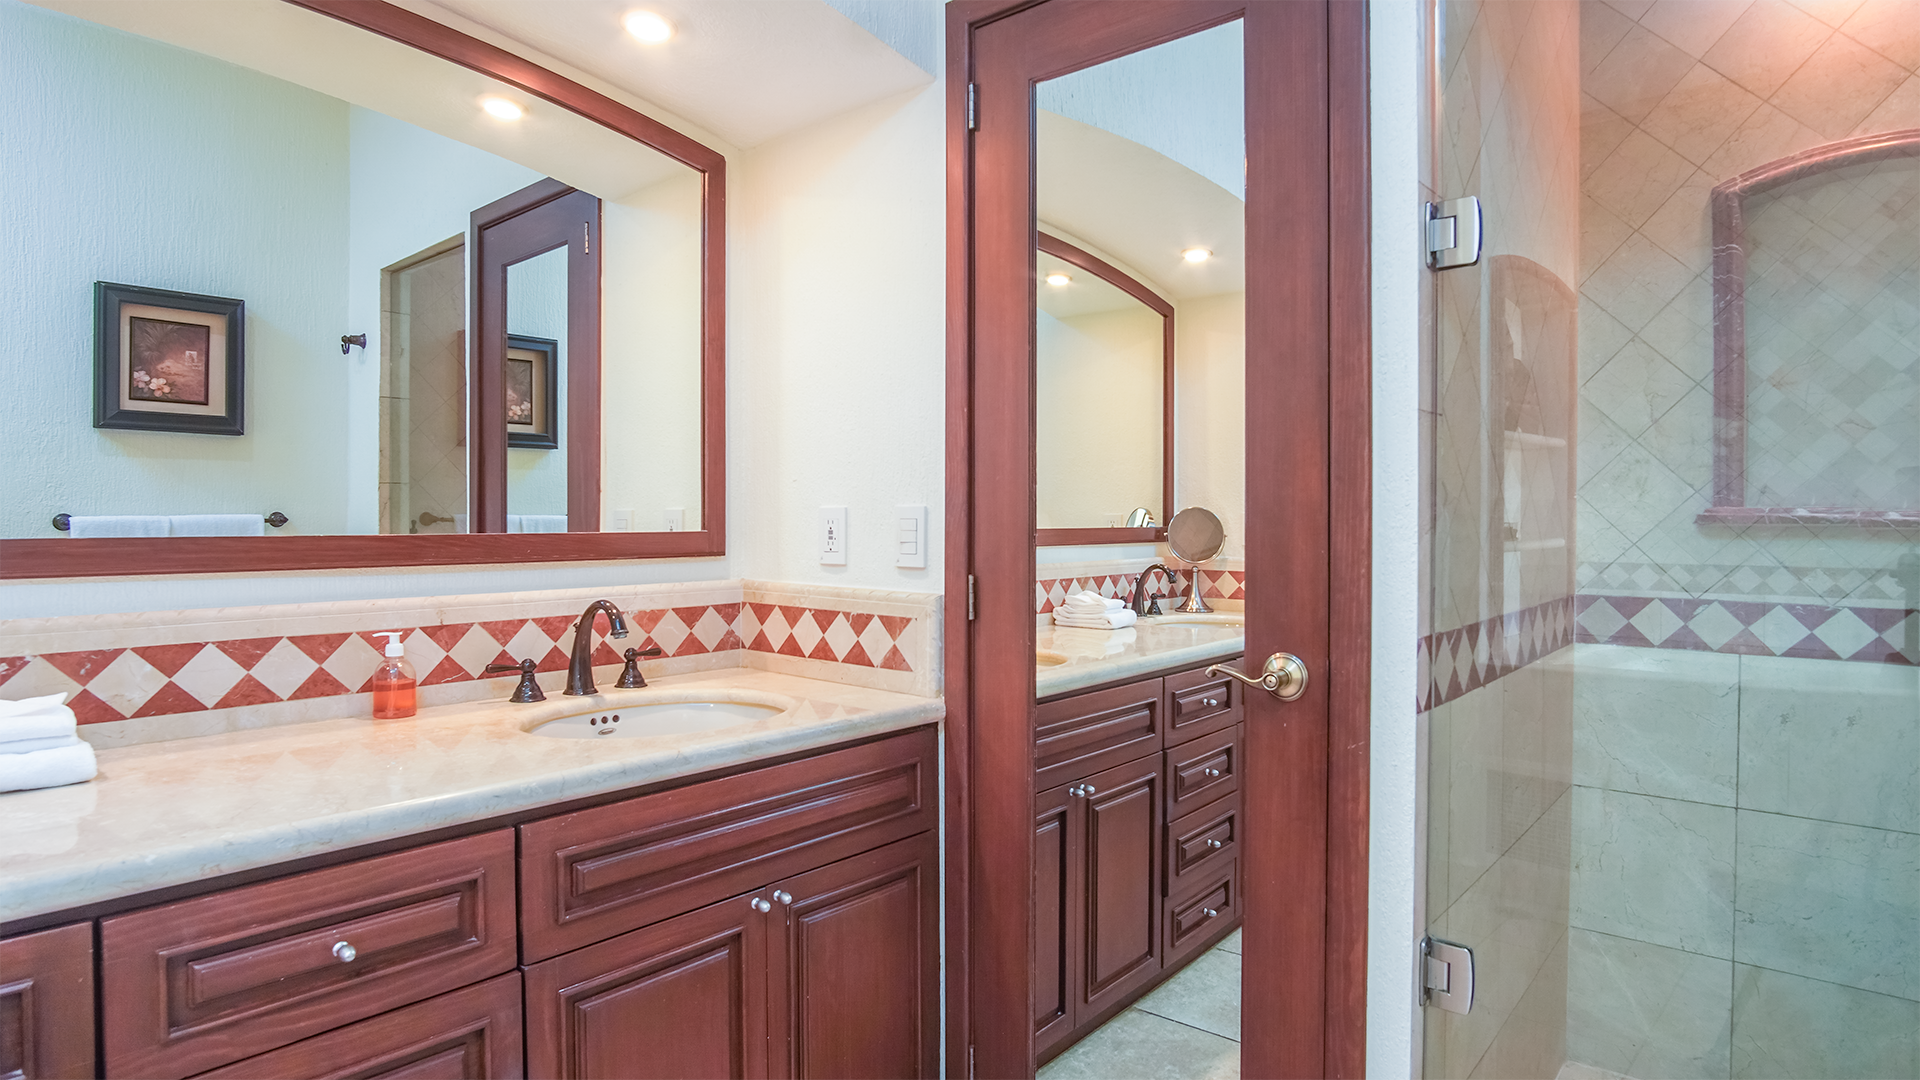 The master bathroom with marbled counter, glass enclosed shower, and elegant wood trim.